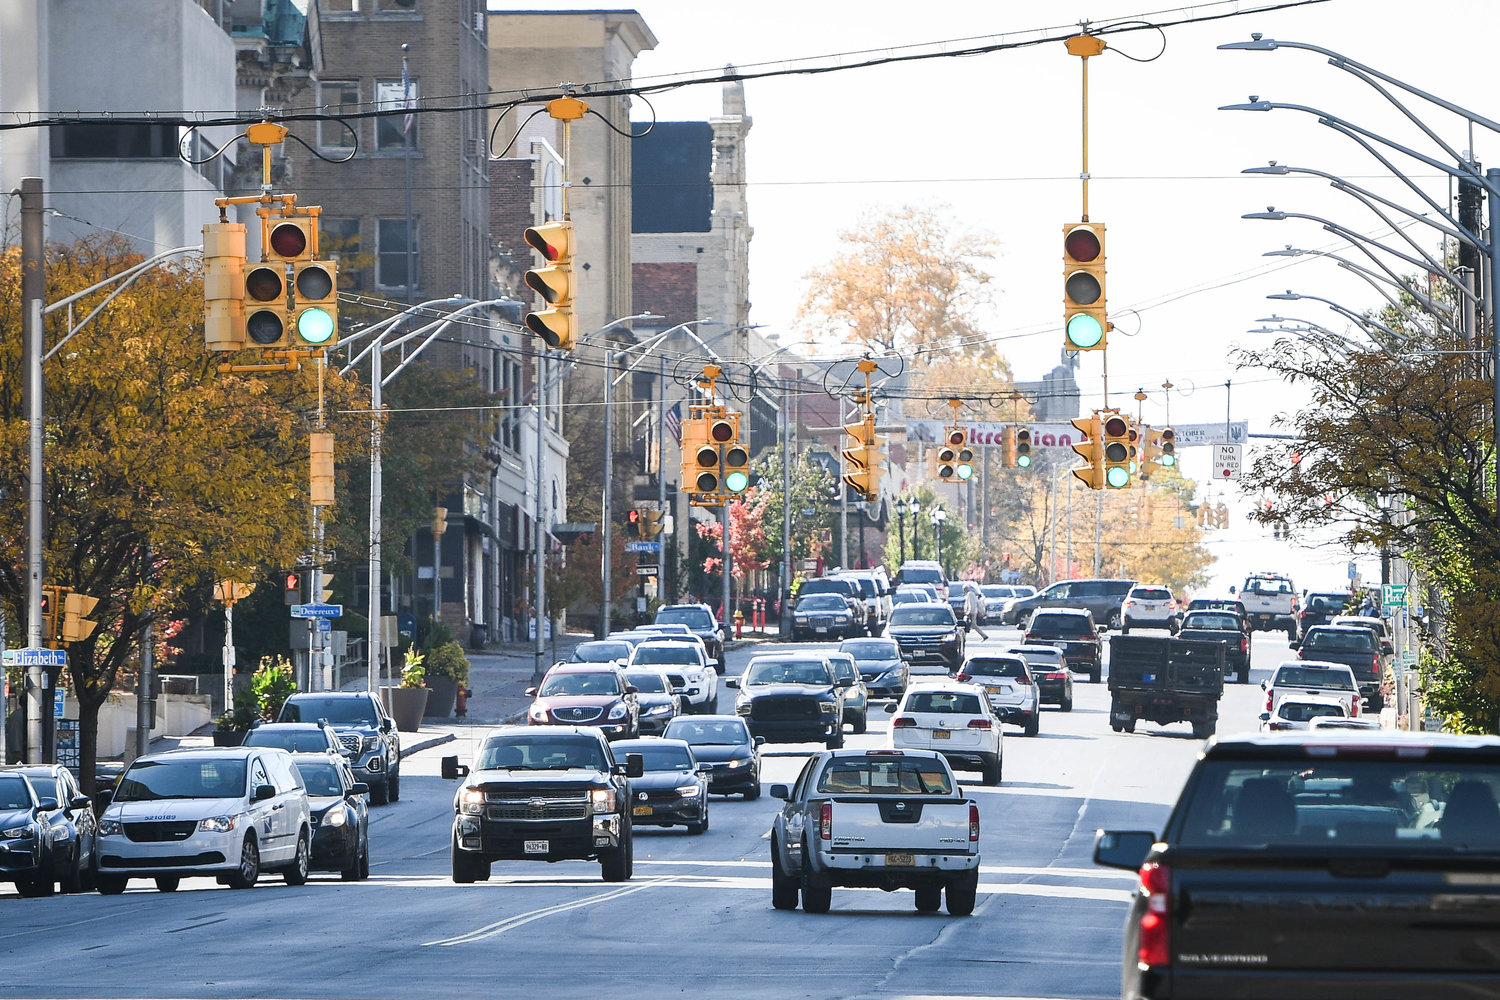 Traffic makes its way down Genesee Street on Friday, Oct. 21 in Utica. On Saturday, Genesee Street, from Oriskany Street to Cottage Place, will decrease from four lanes to three. The street will be comprised of one northbound lane, one southbound lane and a turning lane in the middle.